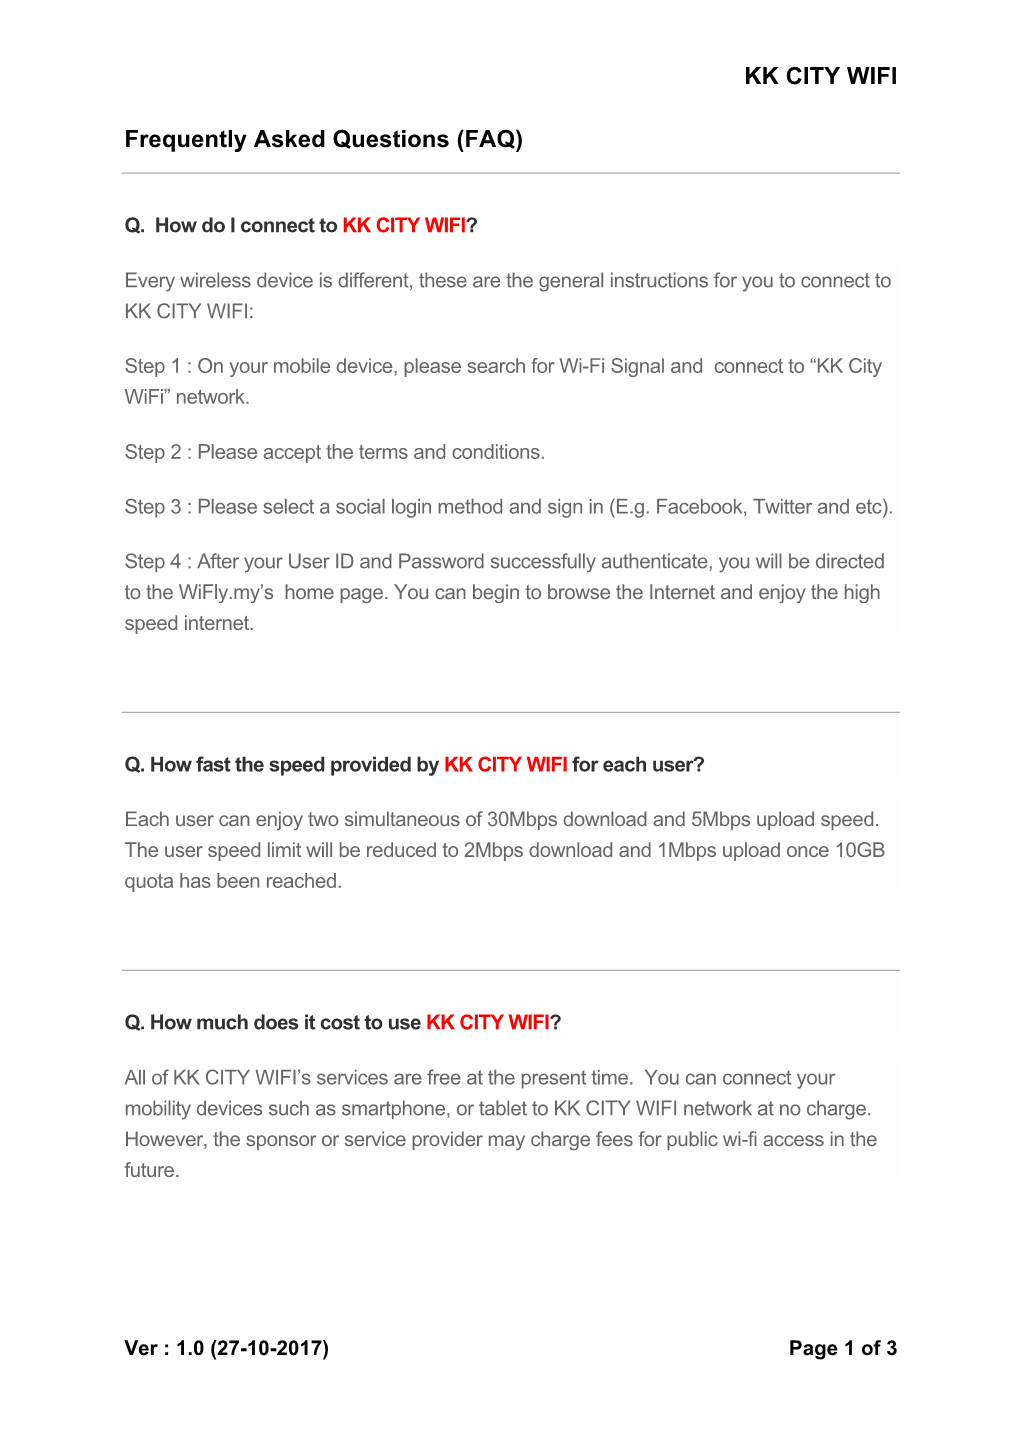 KK CITY WIFI Frequently Asked Questions (FAQ)